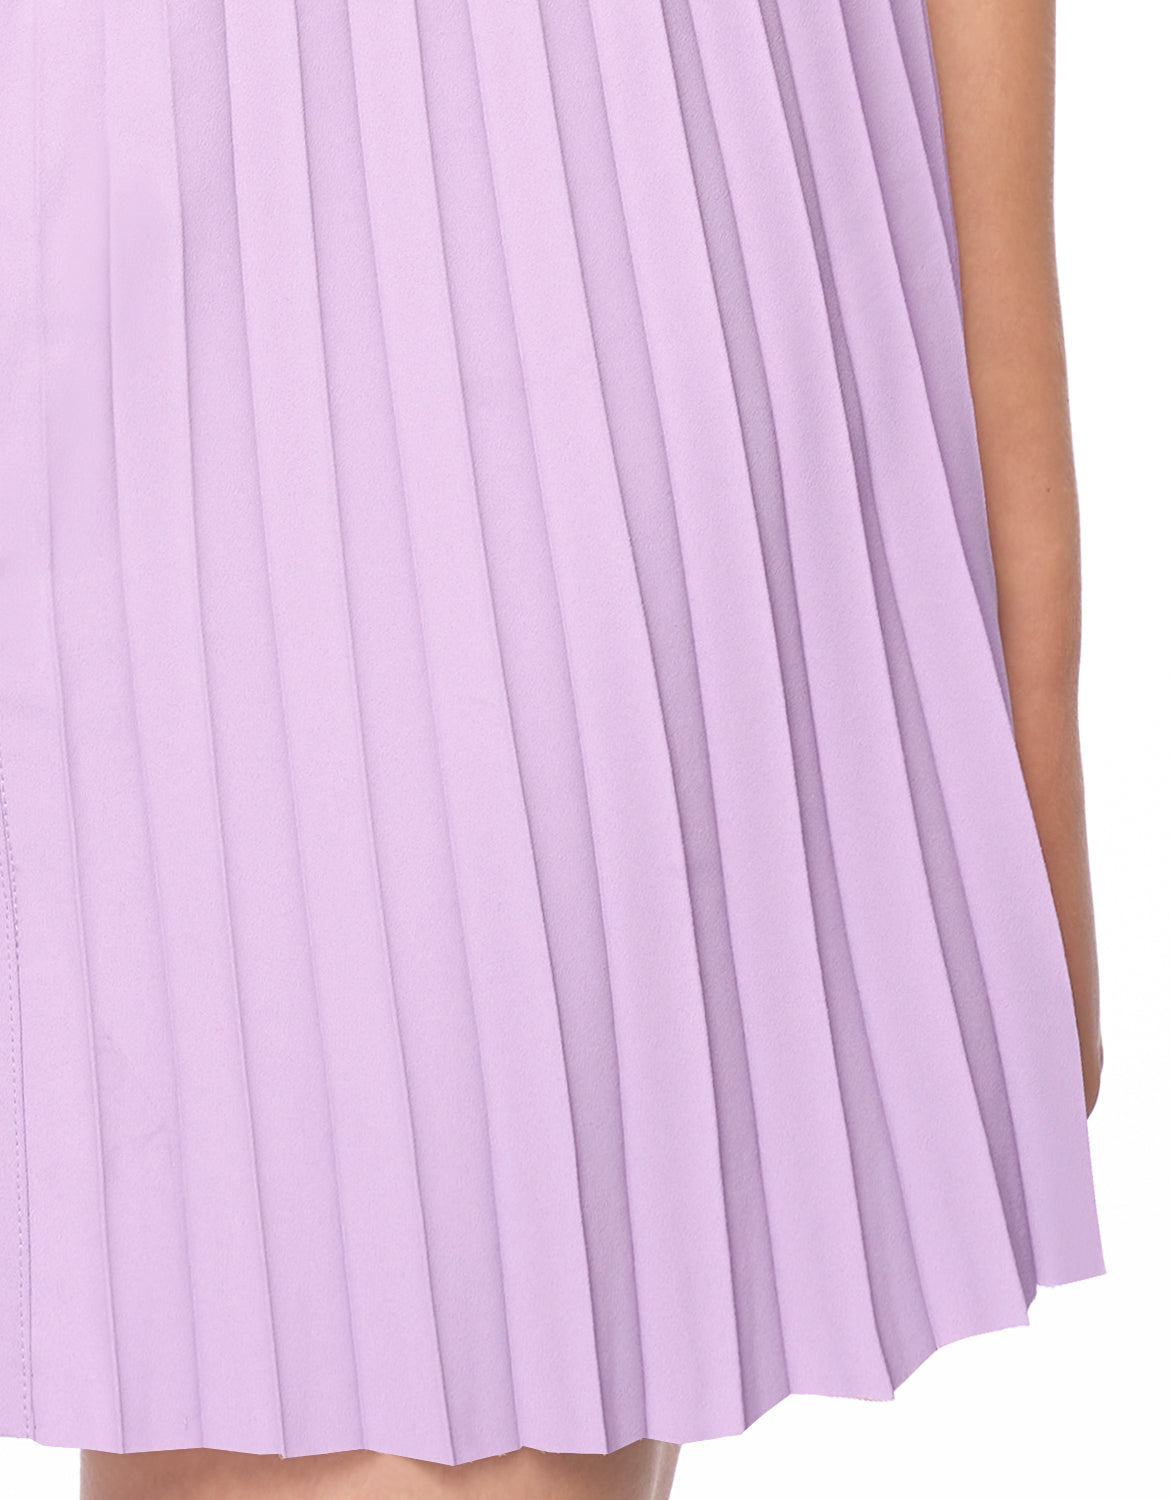 Placket Front Pleated Dress